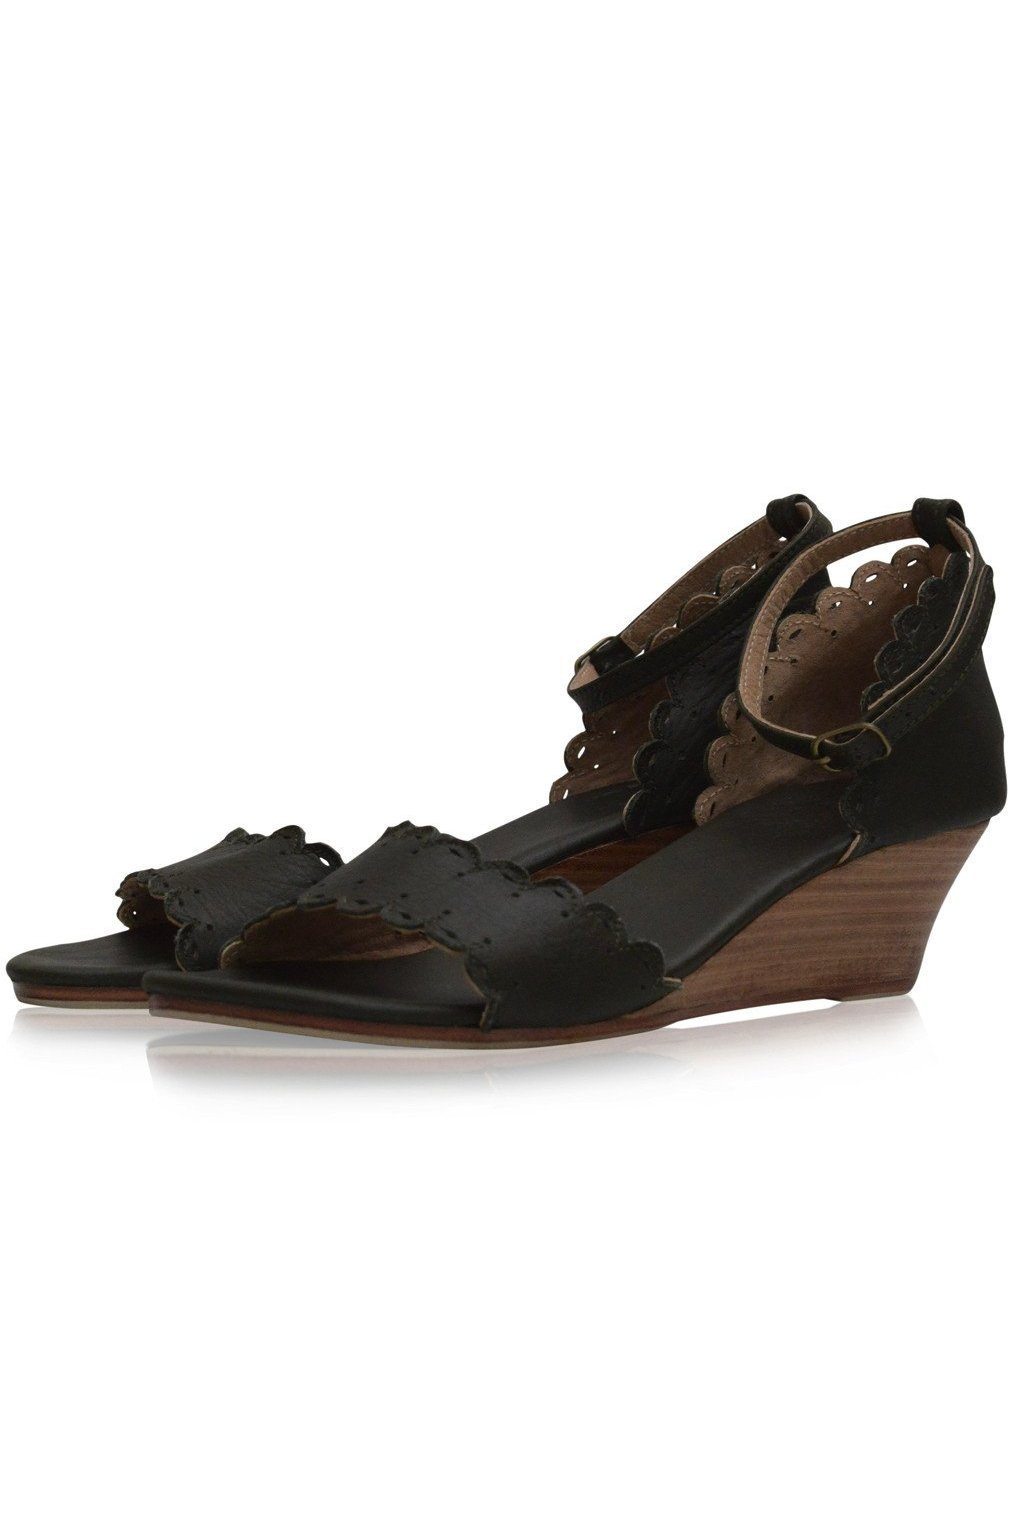 Leather Shoes - Dreamland Leather Wedges